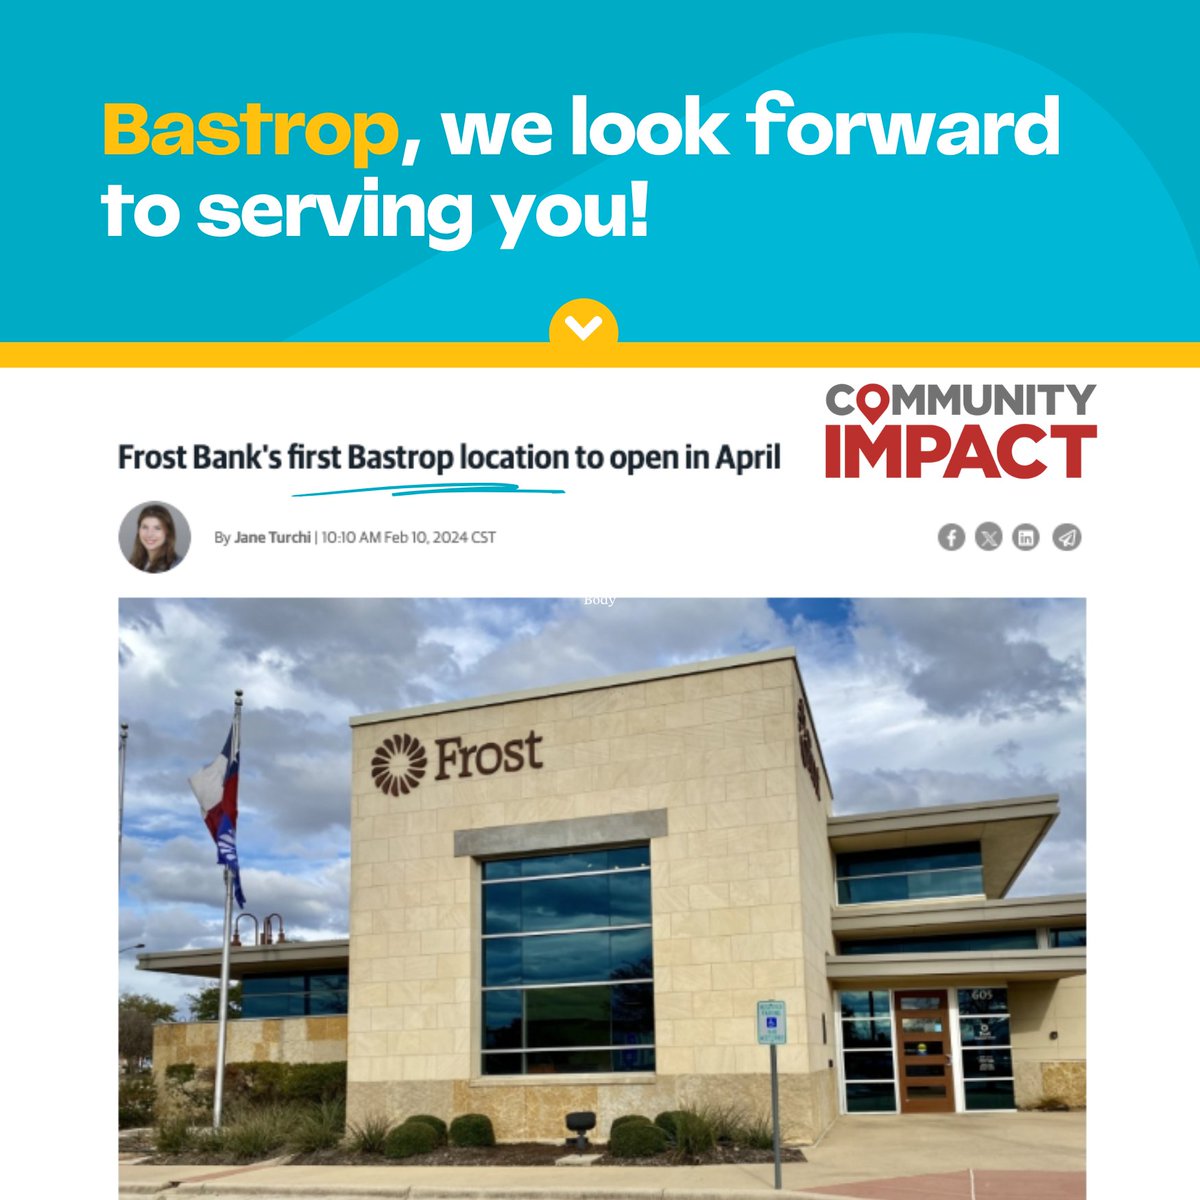 Our newest Austin financial center—Frost #Bastrop—is set to open this April with more Frost Bank locations coming soon across Austin. Learn more about our #Austin expansion via @impactnews: spr.ly/6018ZBRJO #ExactlyWhatYouUnexpected #AustinTx #banking